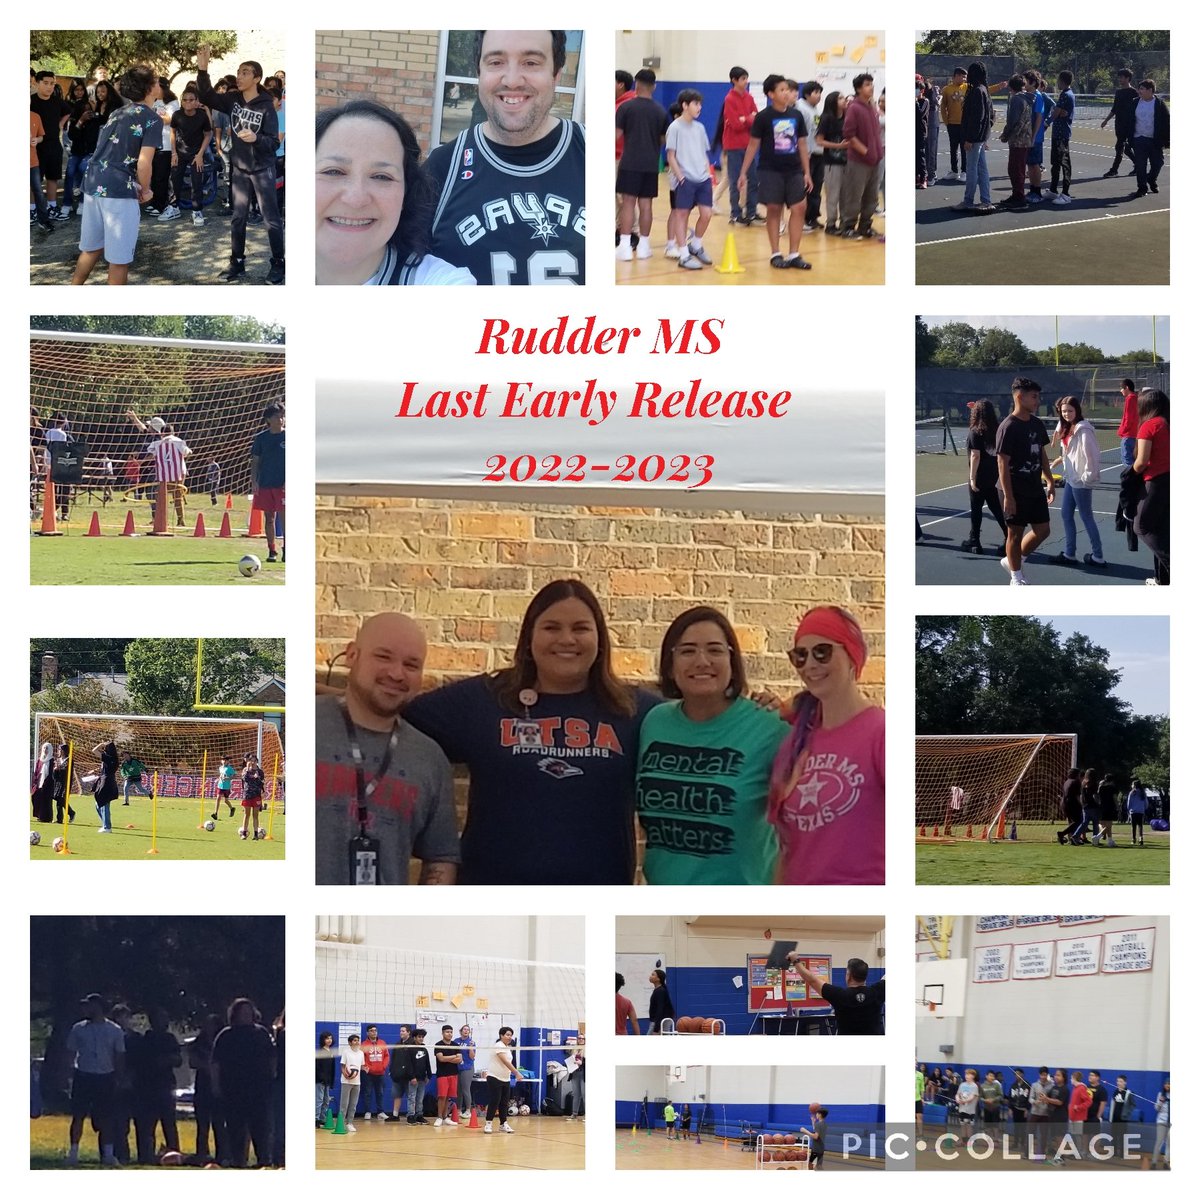 ♥️💙 Last Early Release in the books. Our Rudder coaches, counselors and teachers worked to make it one to remember. LEAD by building relationships with our Rangers ♥️💙 @EarlRudderMS #RangersLead #RudderStrong @pramireznisd @teachinitup @brandon_m_tate @MsCMLozano @MrVanlanham